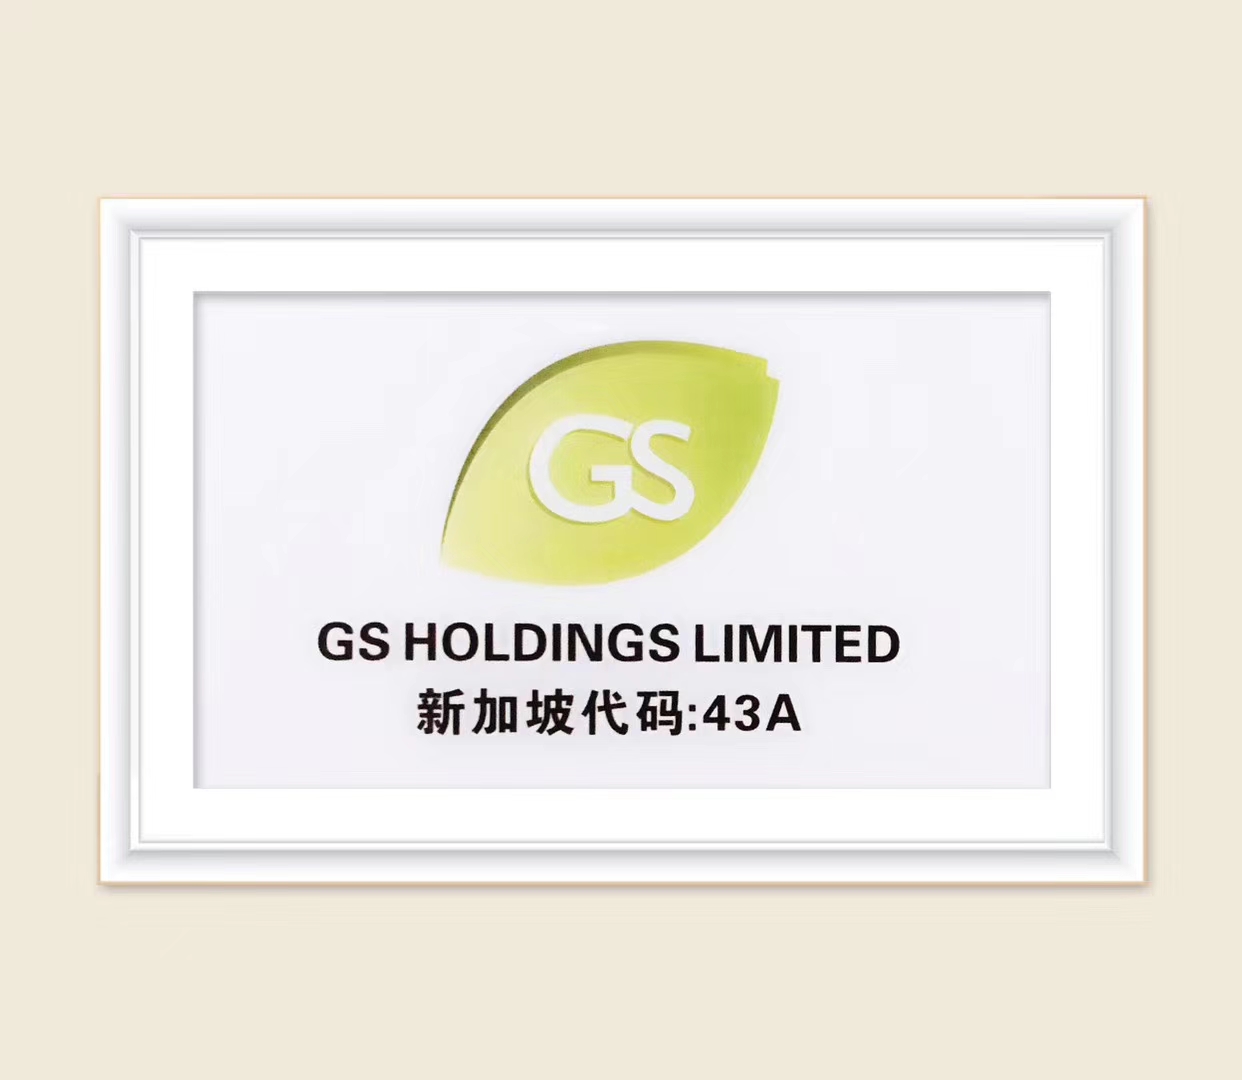 GS turns losses into gains, comprehensive industry won firm support of the people